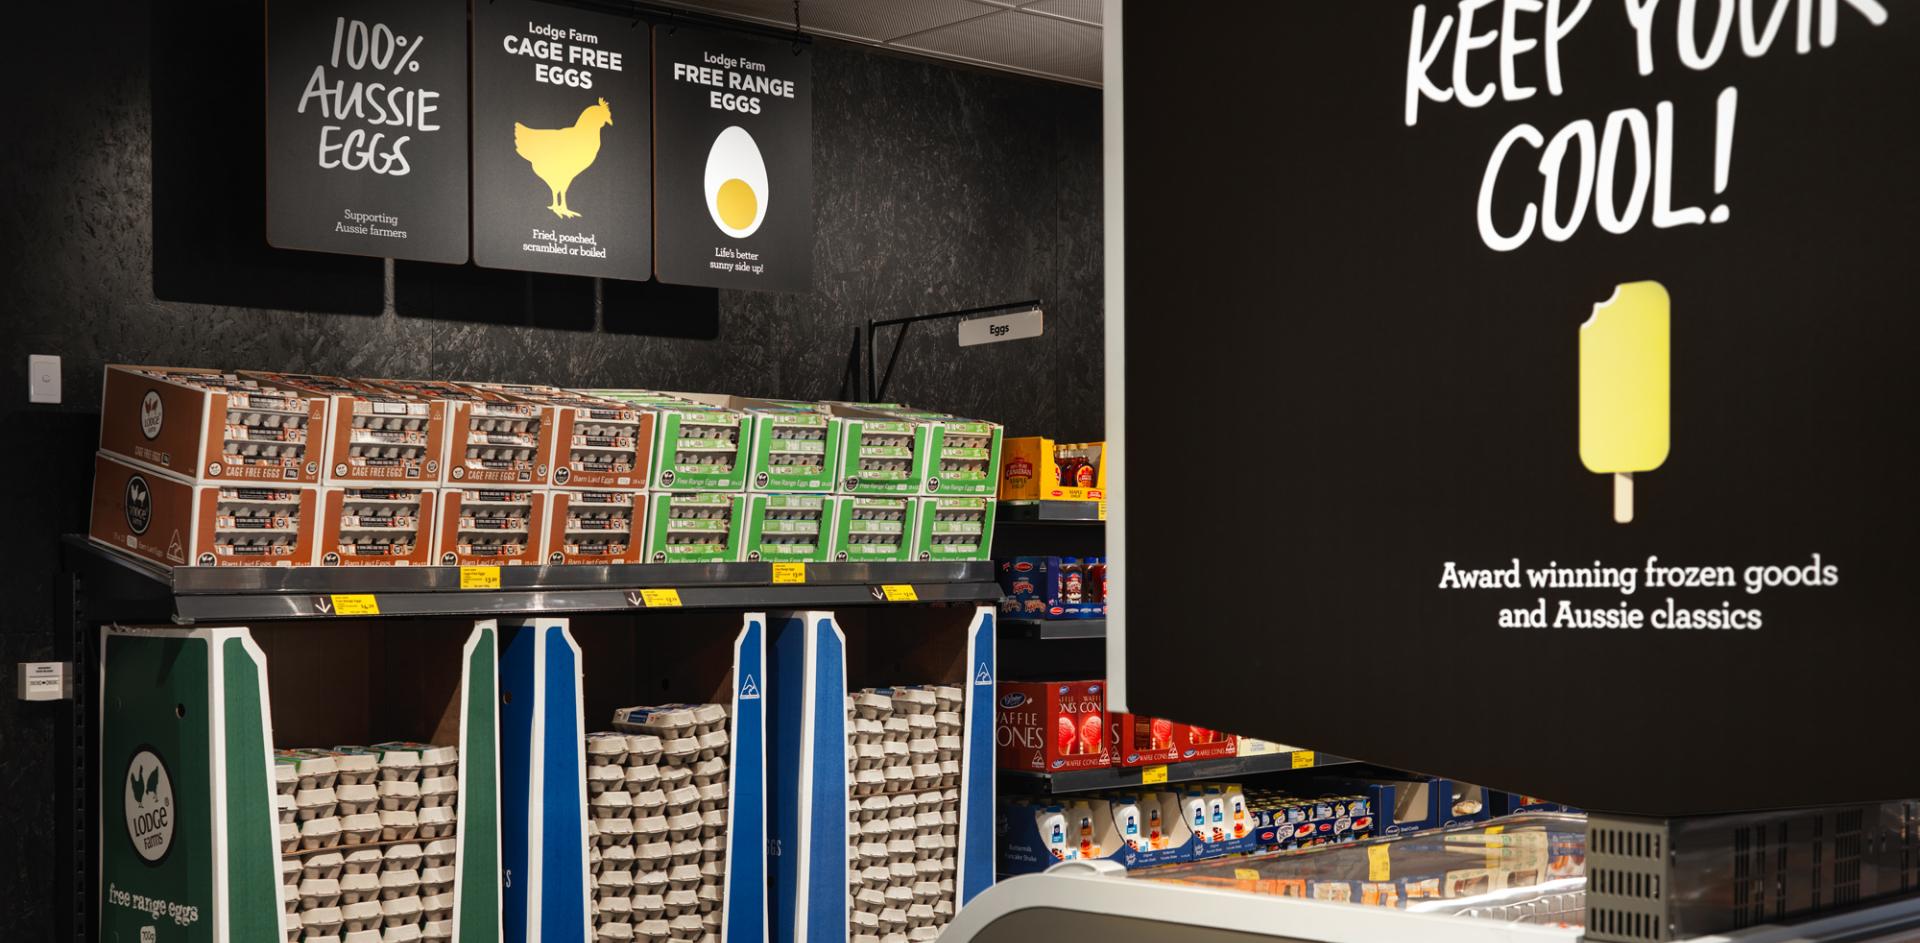 View of the egg display inside an ALDI store